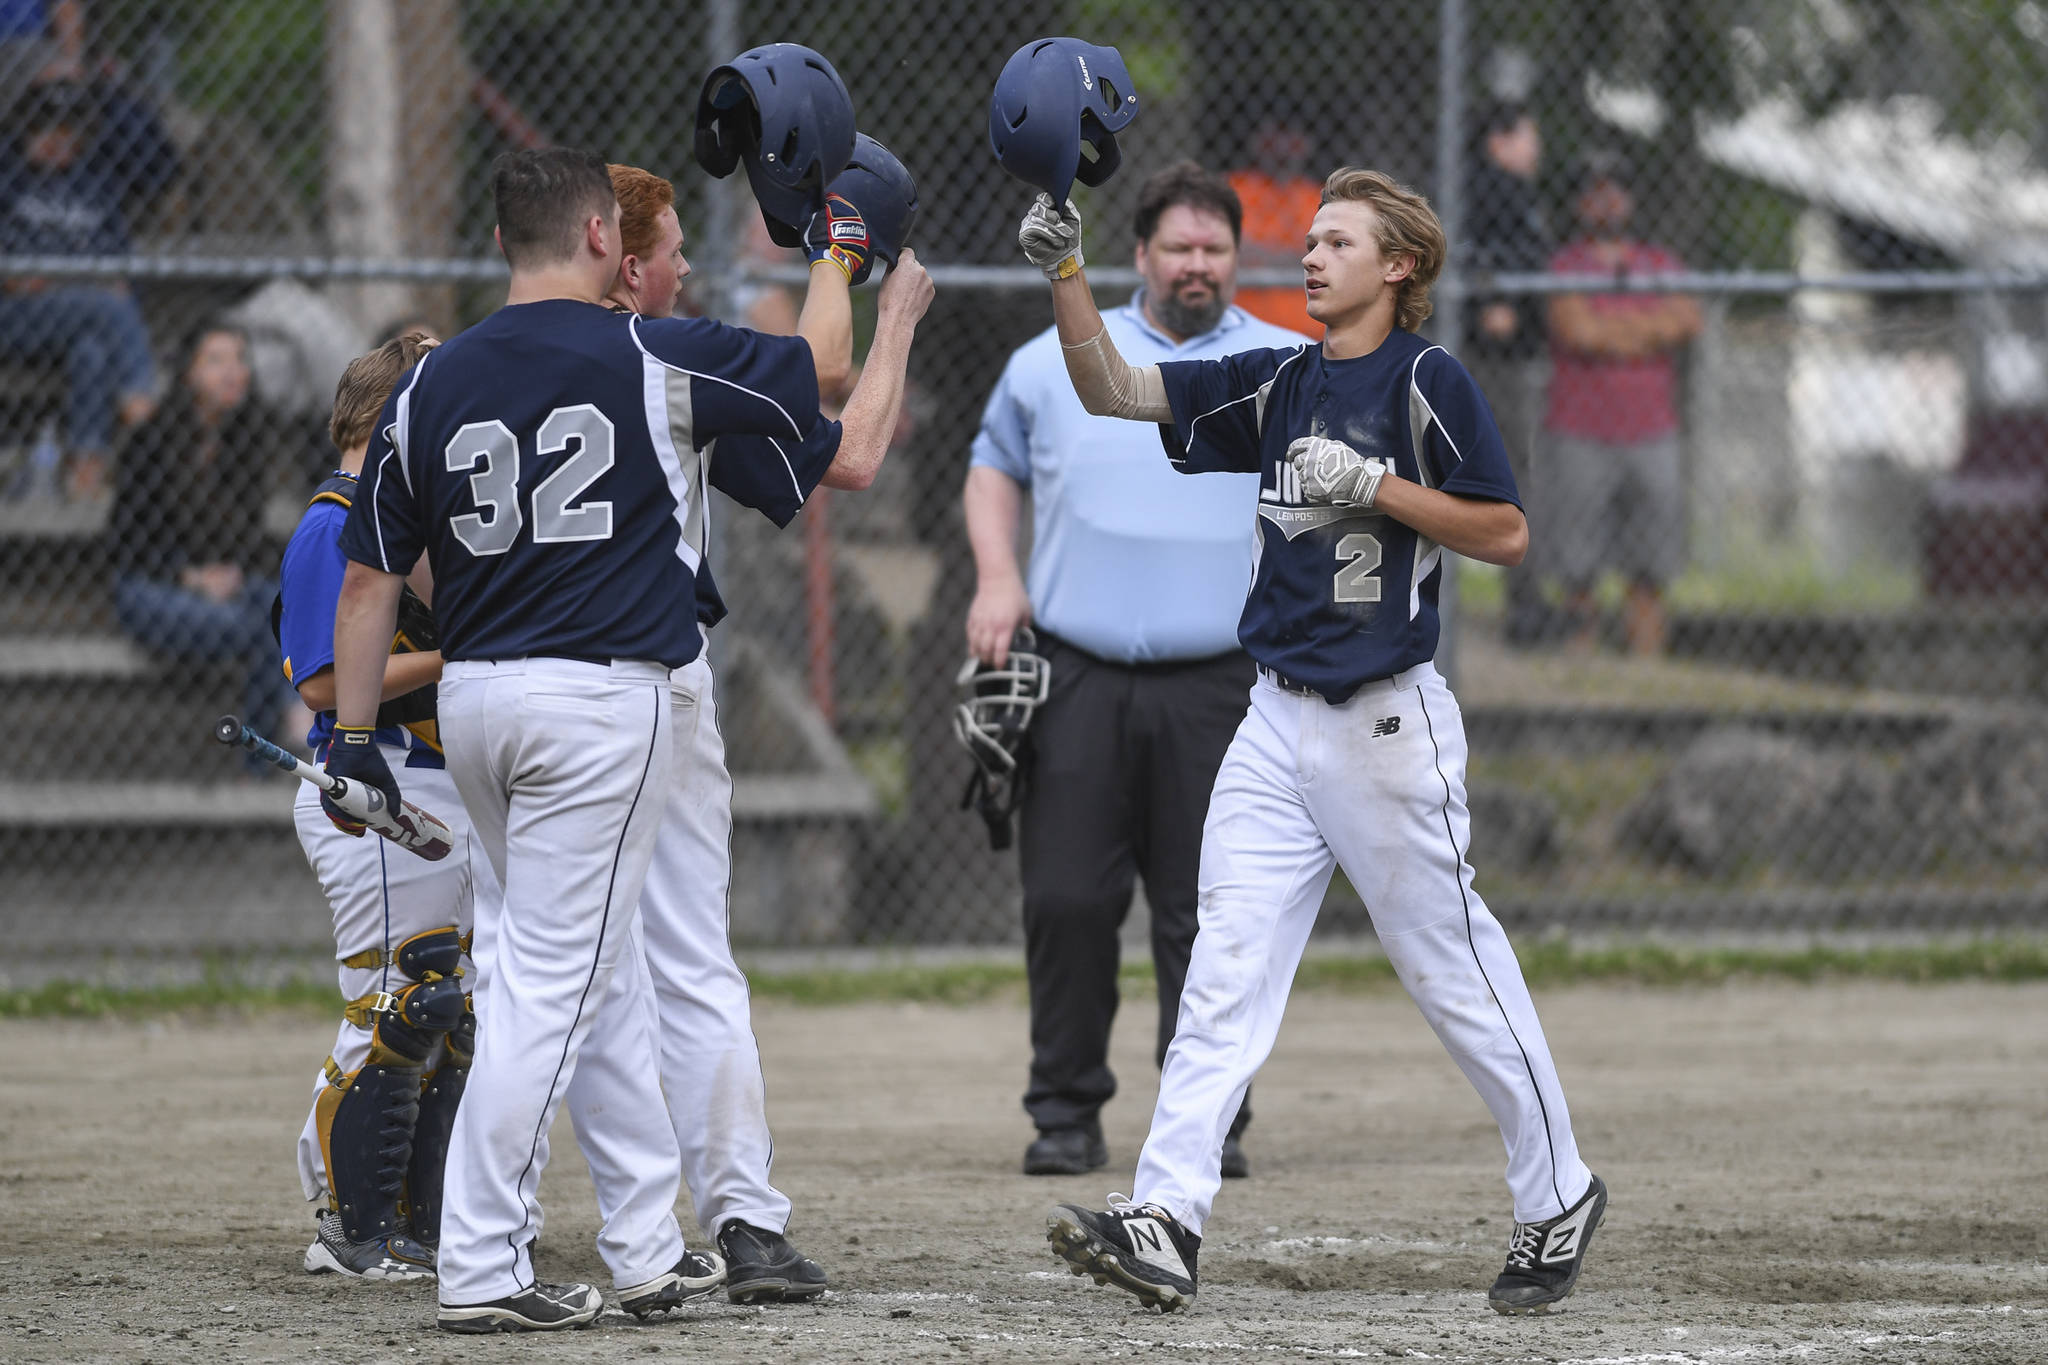 Juneau’s Gabe Storie, right, touches helmets with teammate Robert Cox and Luke Mallinger after hitting a two run homer in the fourth inning against Bartlett in Legion League baseball at Adair-Kennedy Memorial Park on Friday, June 21, 2019. (Michael Penn | Juneau Empire)